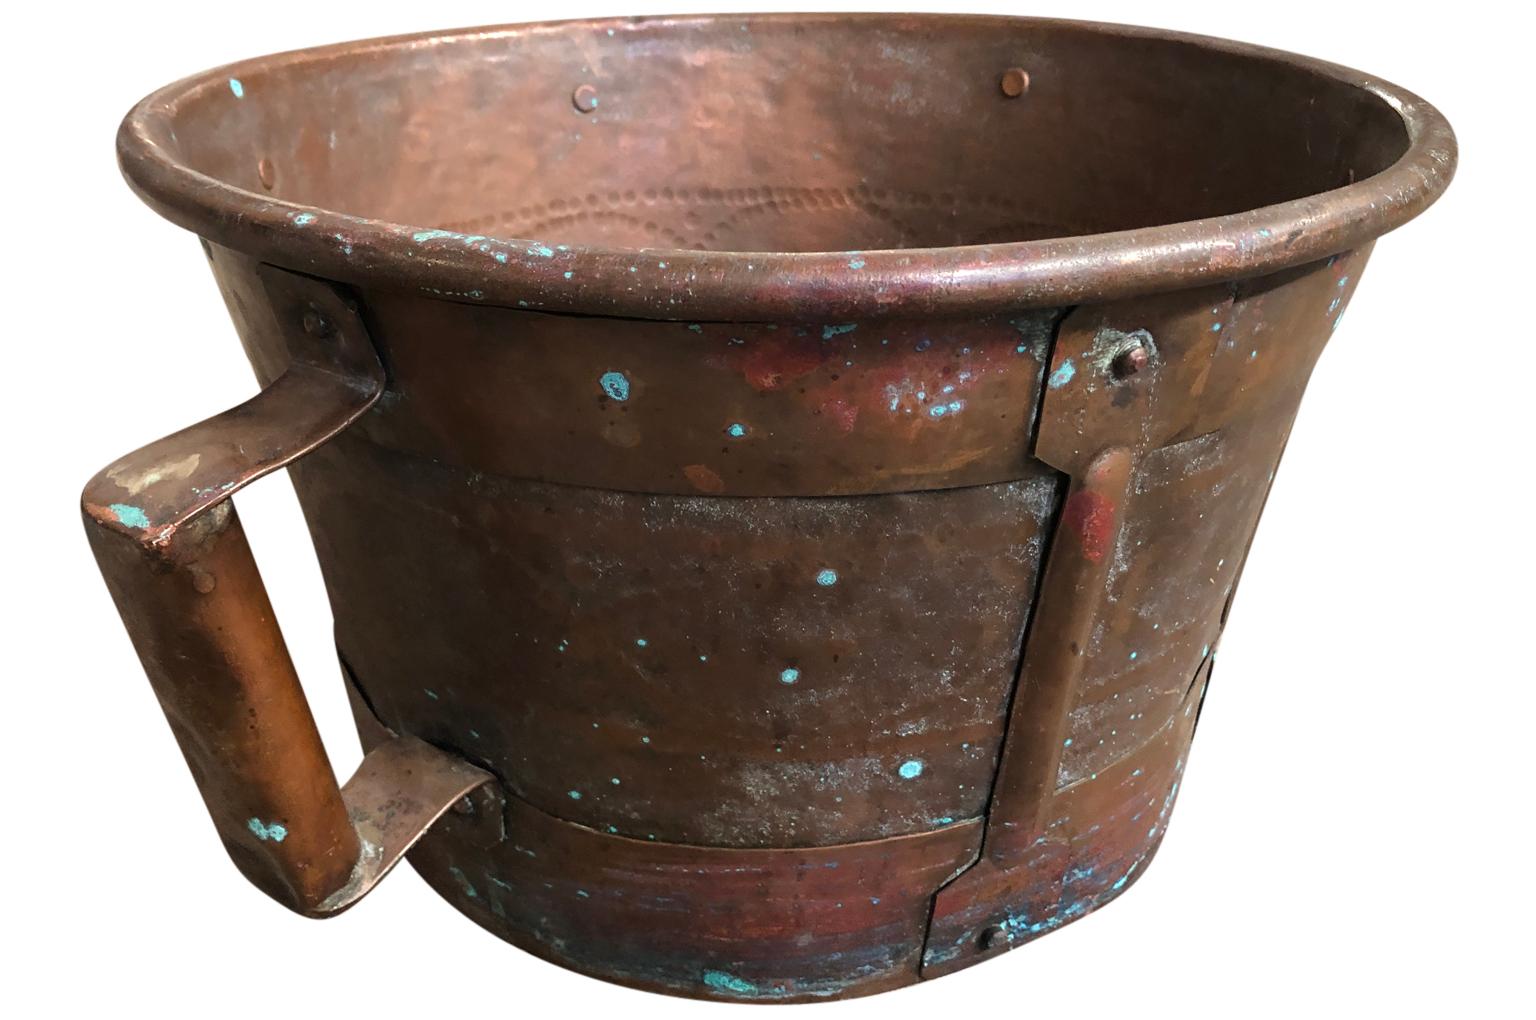 A beautiful 18th century French copper grain measure. A perfect kitchen accent piece or wonderful as a planter.